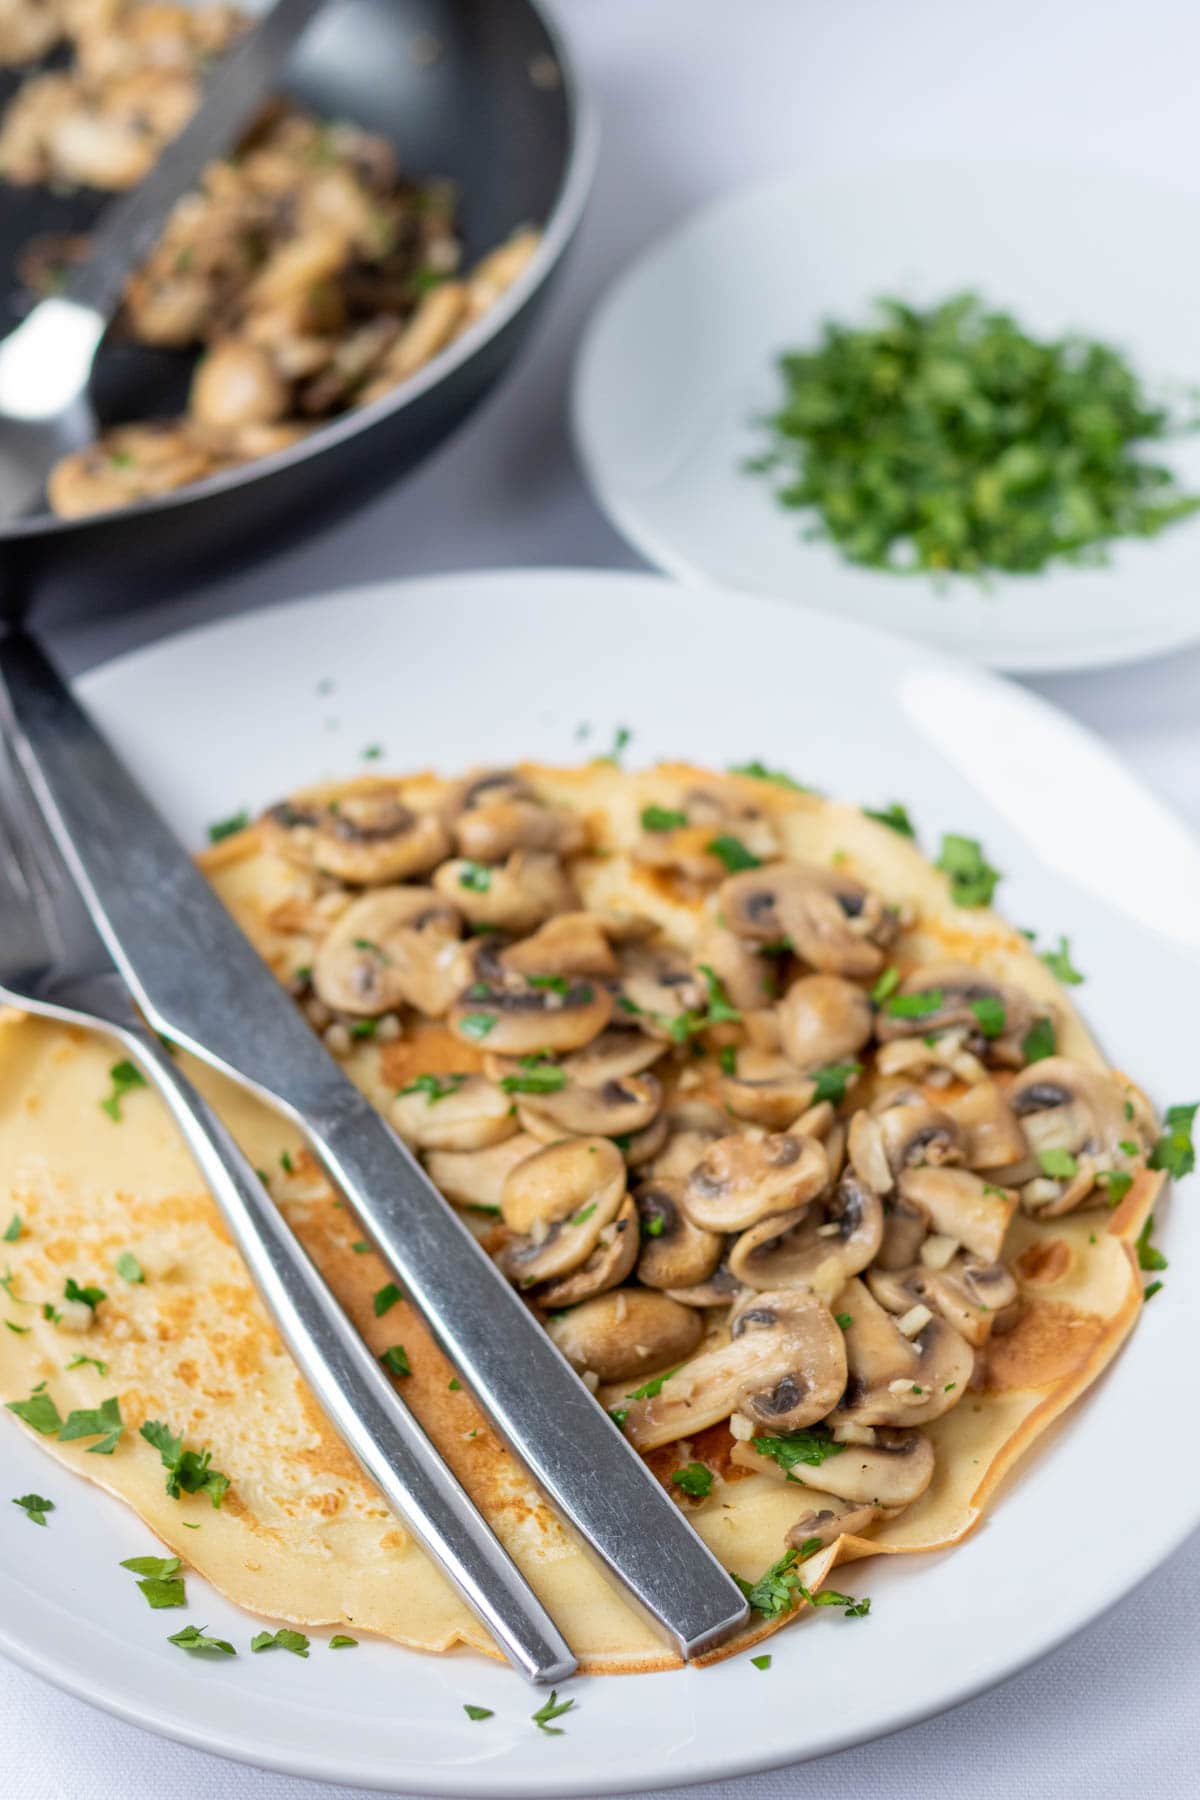 A savoury pancake with garlic mushrooms on a plate with a knife and fork to the side. Frying pan of garlic mushrooms and dish of chopped parsley in the background.